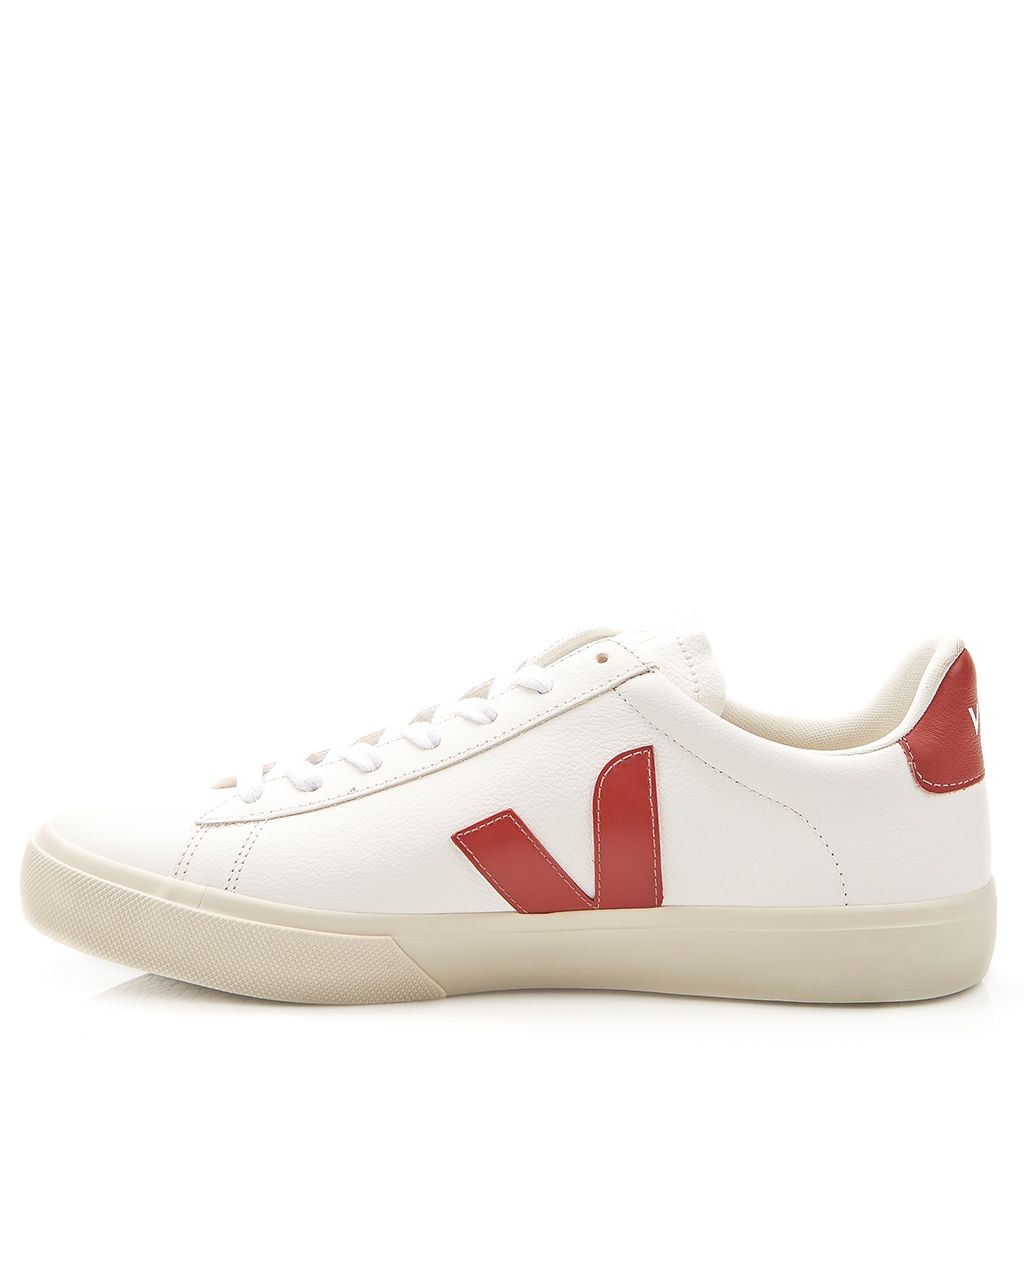 Veja Campo Sneakers Rood 077660-001-41